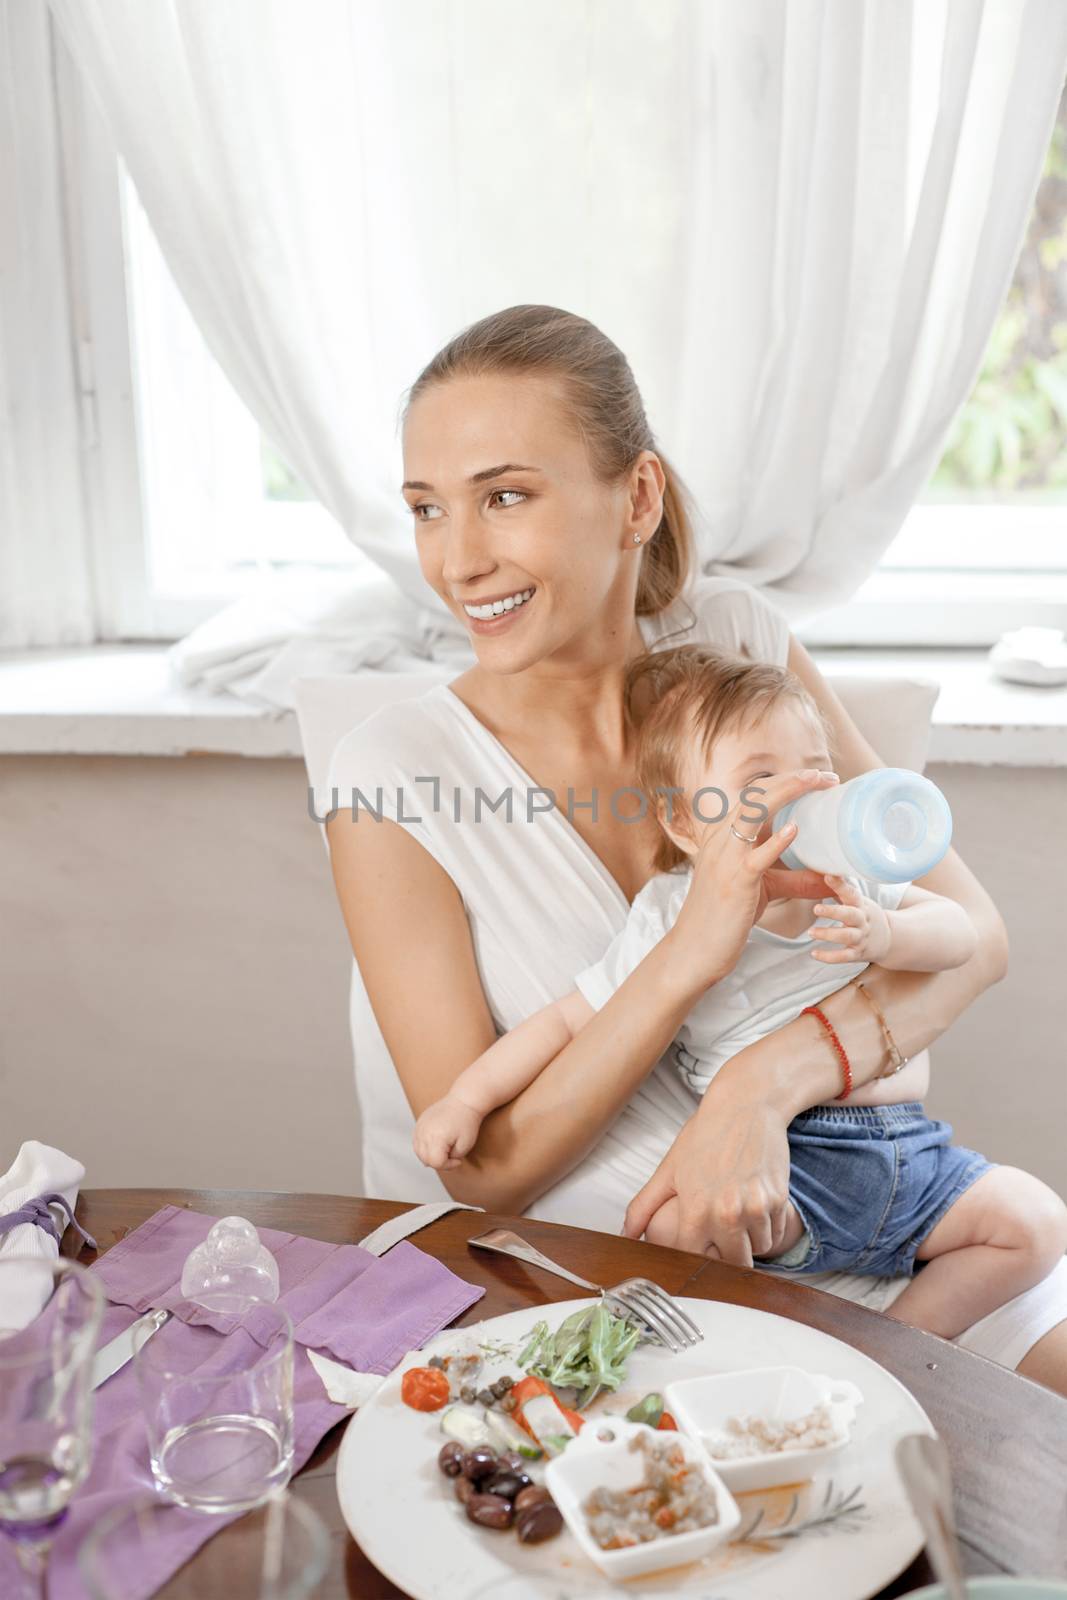 A happy smiling mother feeding her baby with milk bottle in a restaurant.